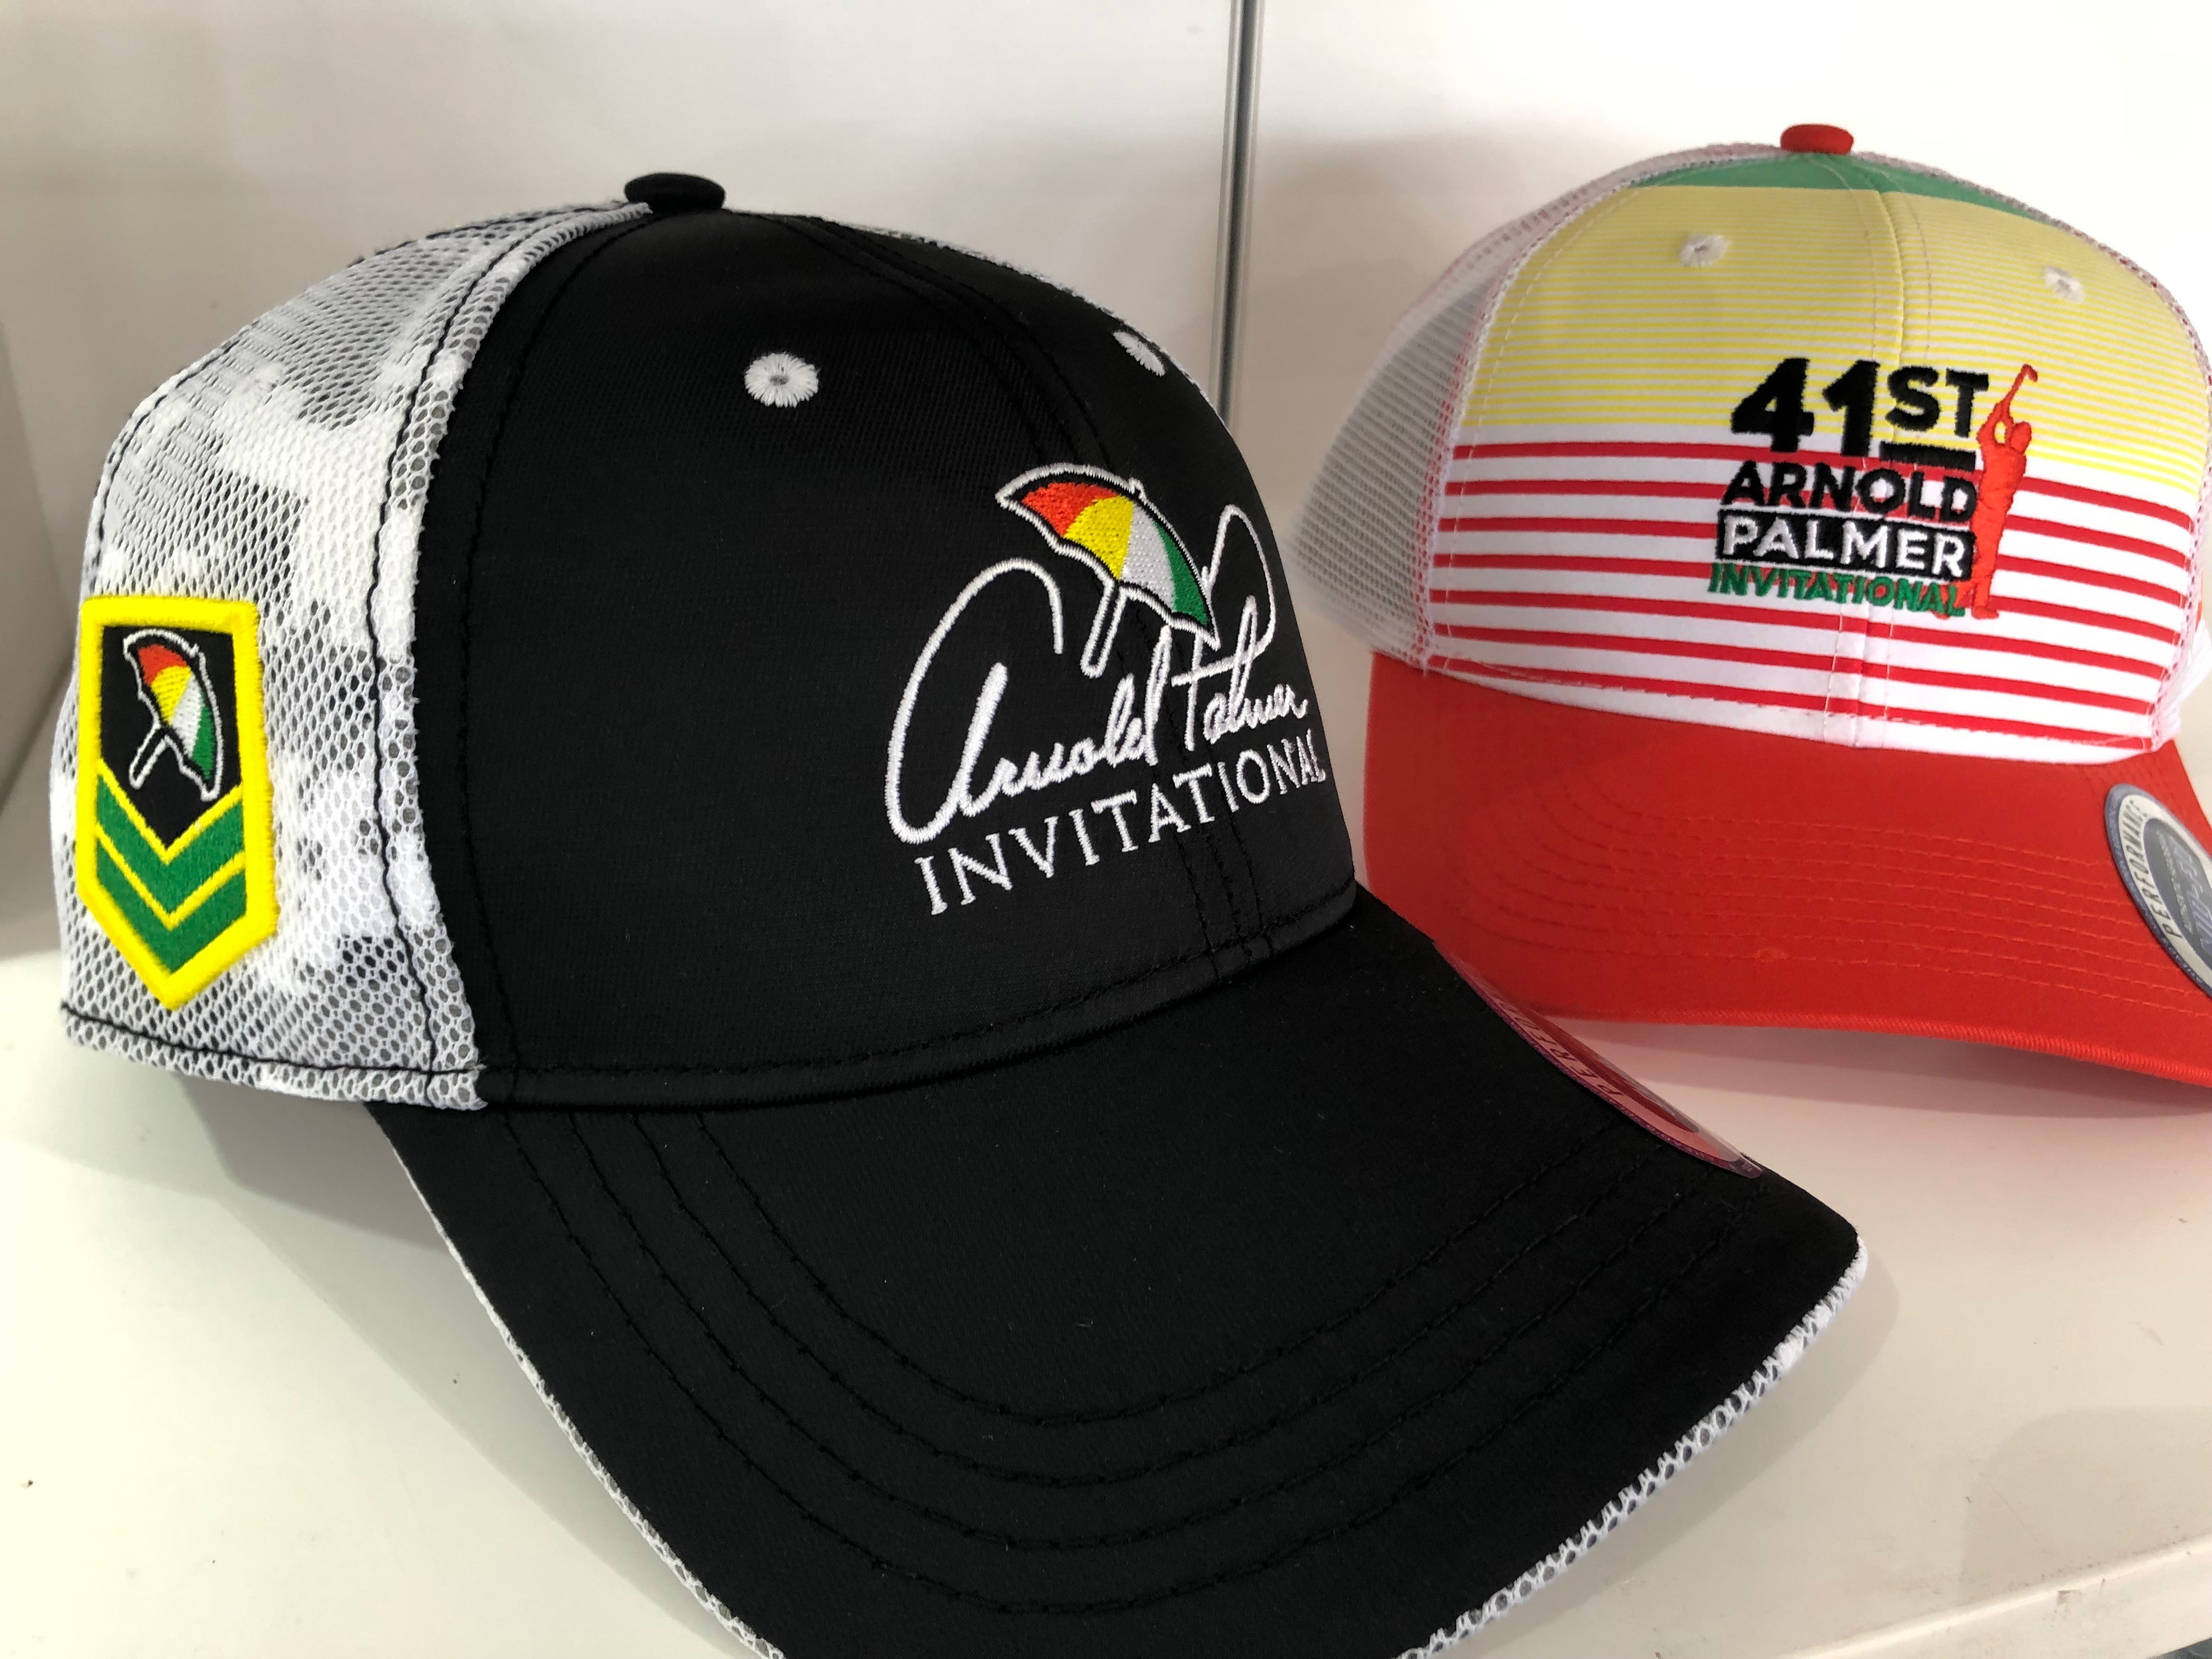 Picture of the Arnold Palmer Hat from Ahead Apparel Company